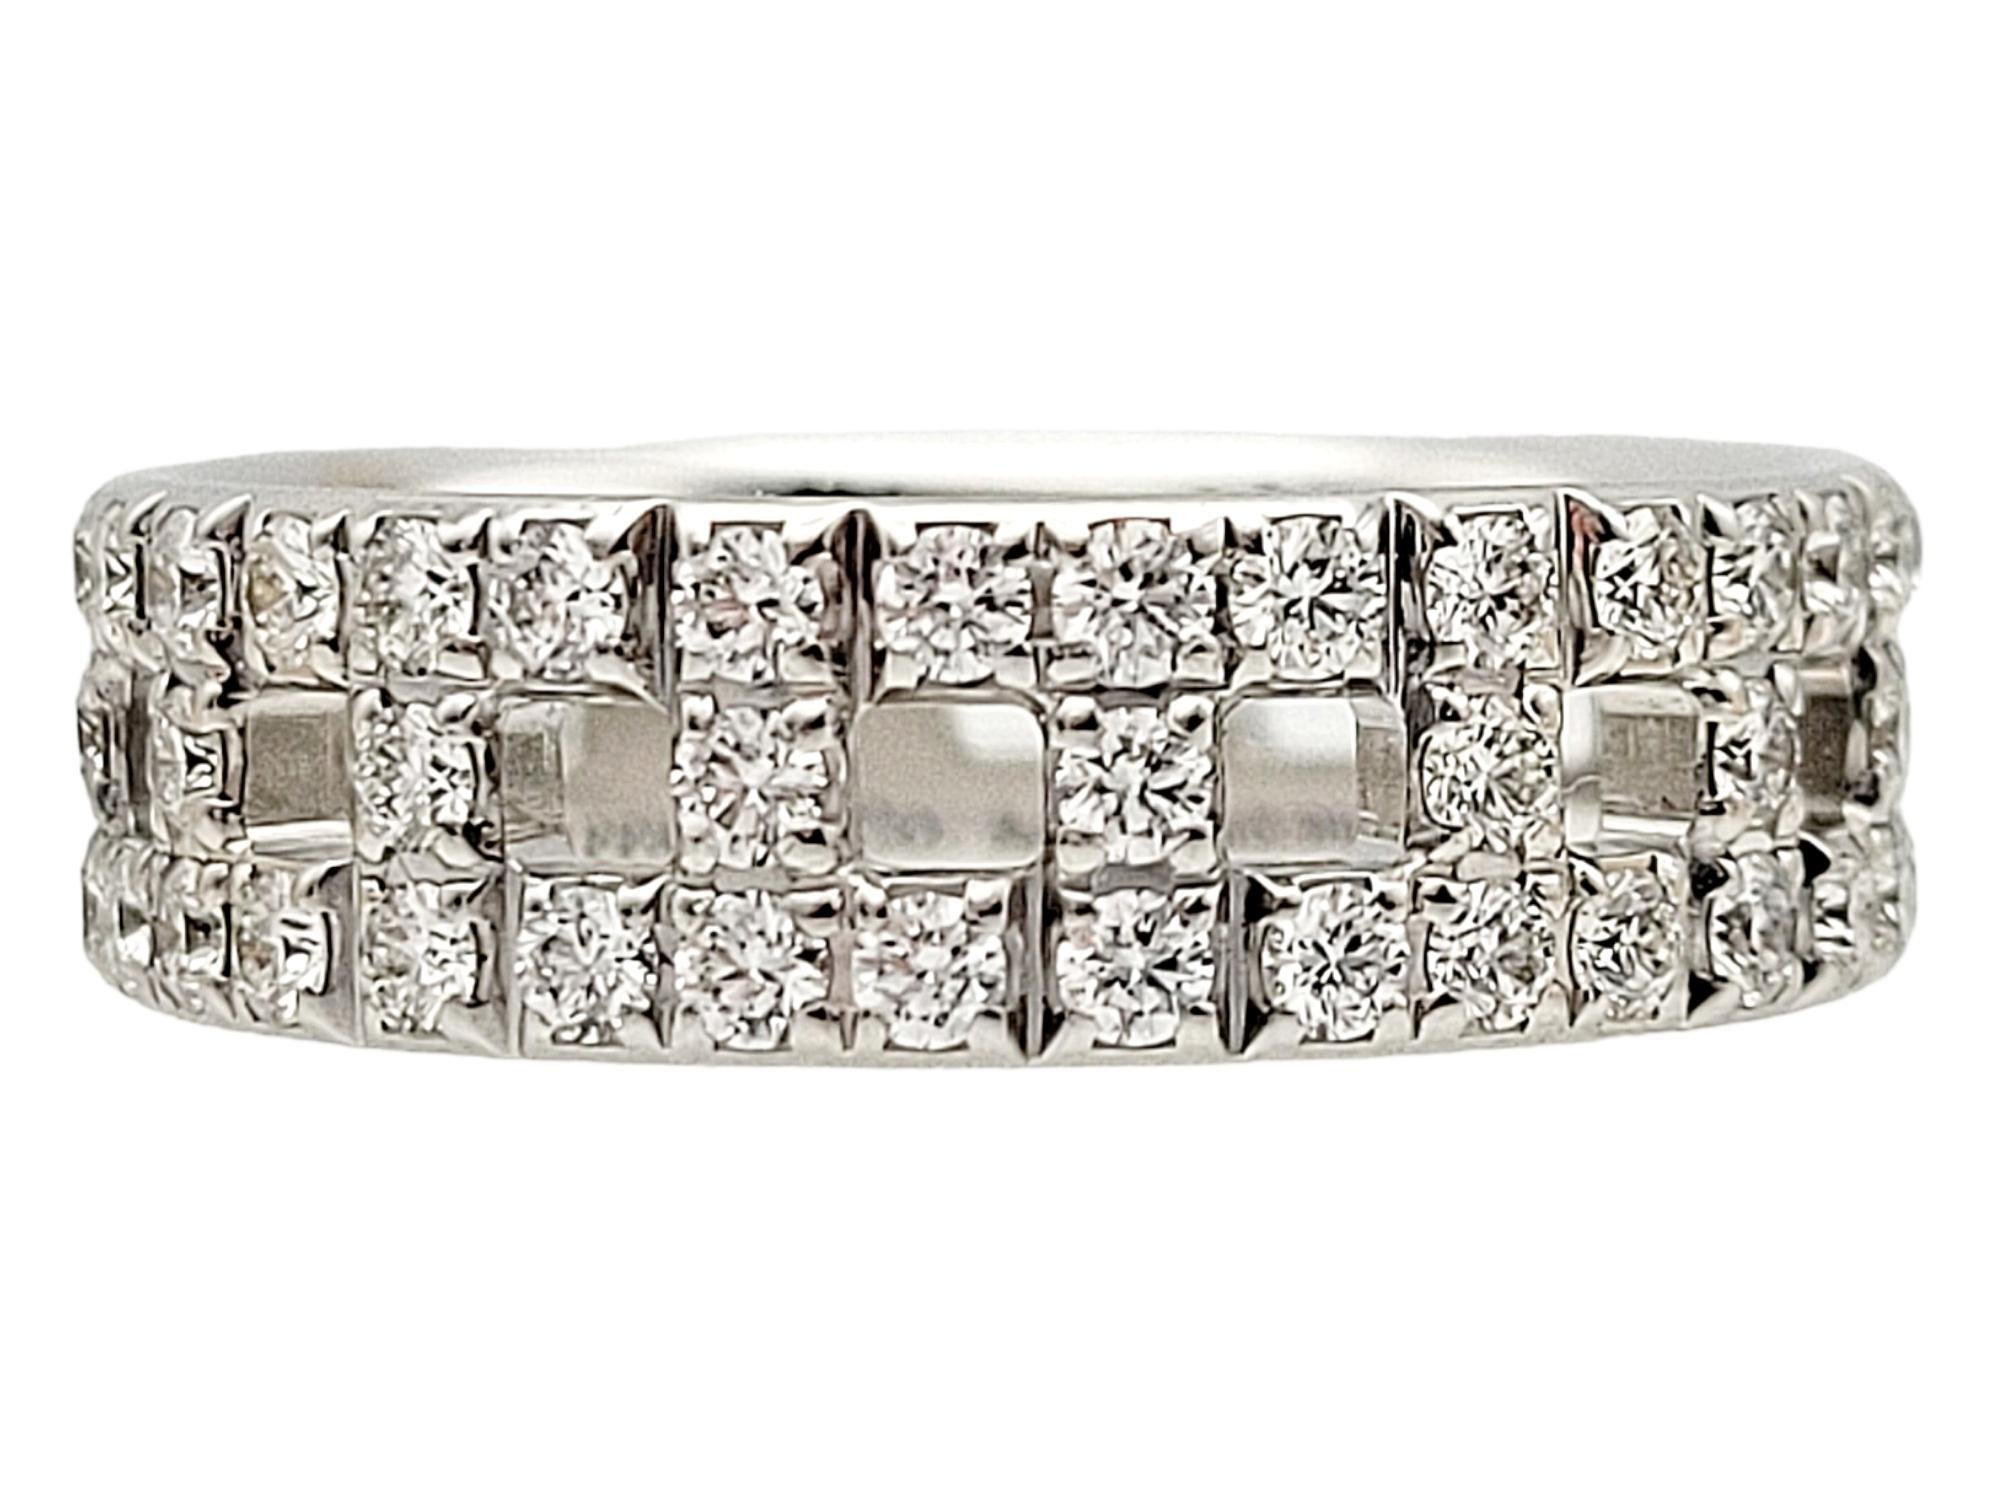 Tiffany & Co. Tiffany T True Wide Band Ring with Diamonds in 18 Karat White Gold 4